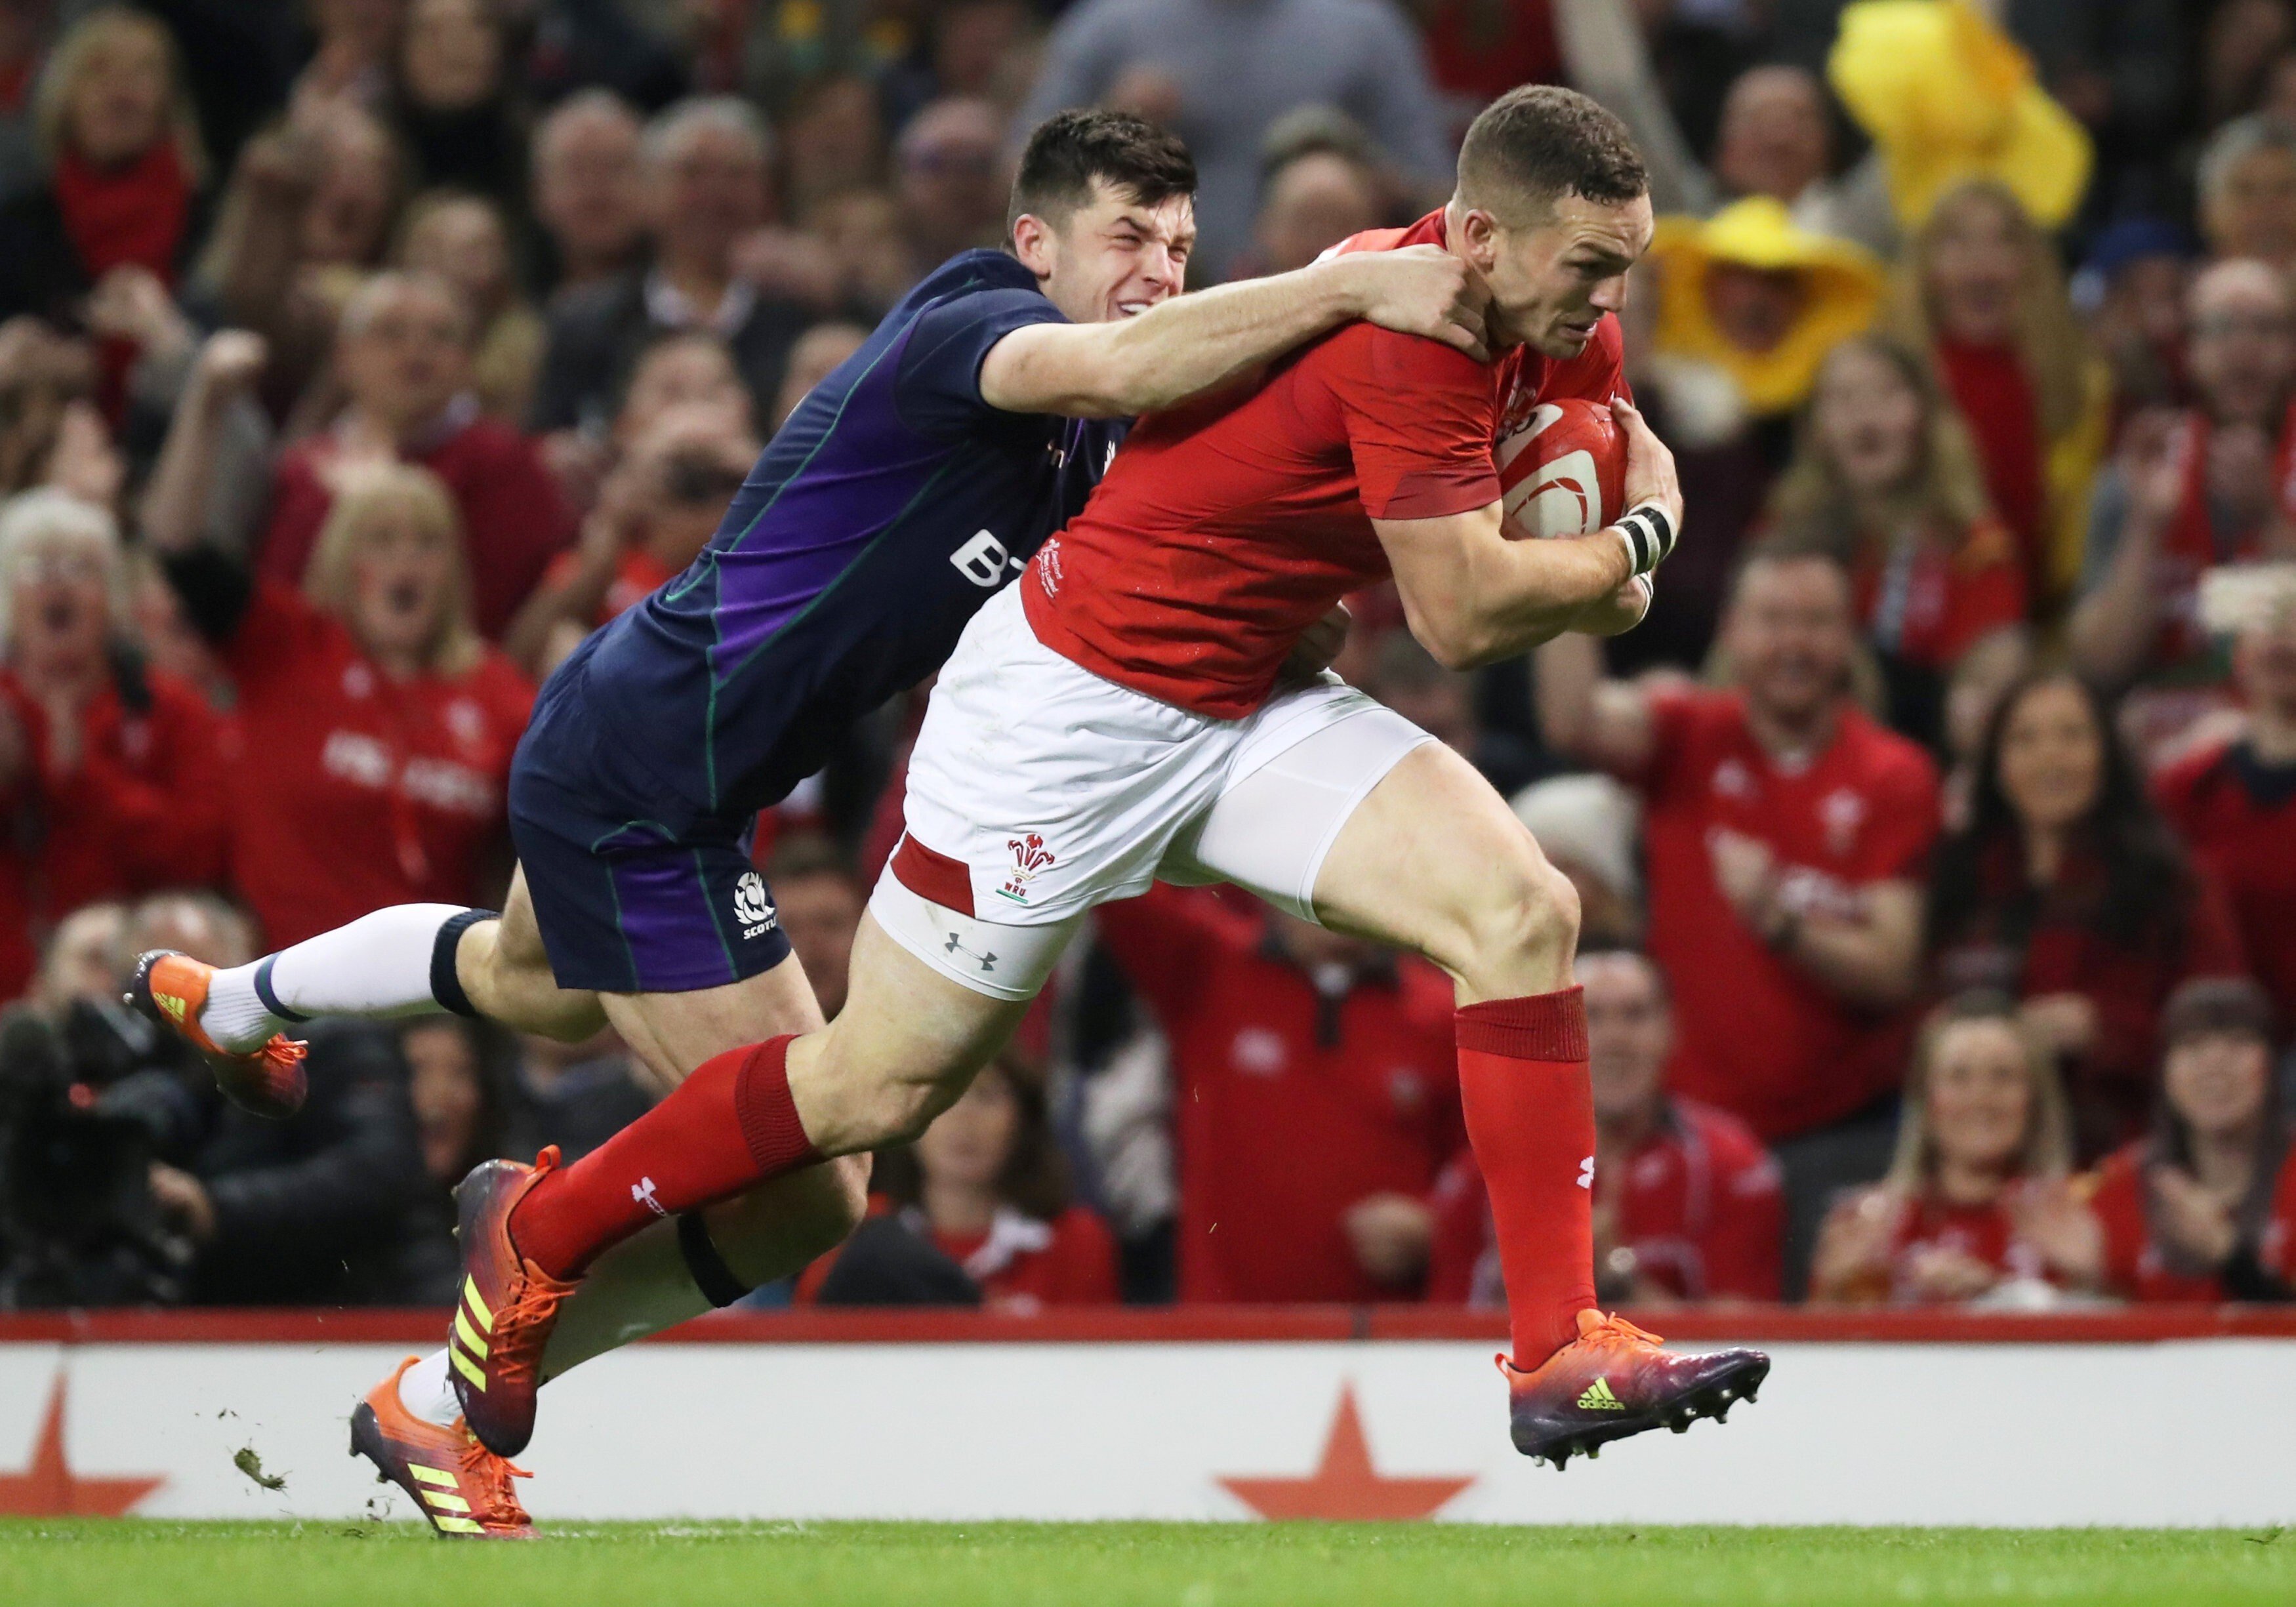 George North is one of the many Welsh stars at Ospreys, and James Davies-Yandle hopes to create a pathway for more. Photo: Reuters